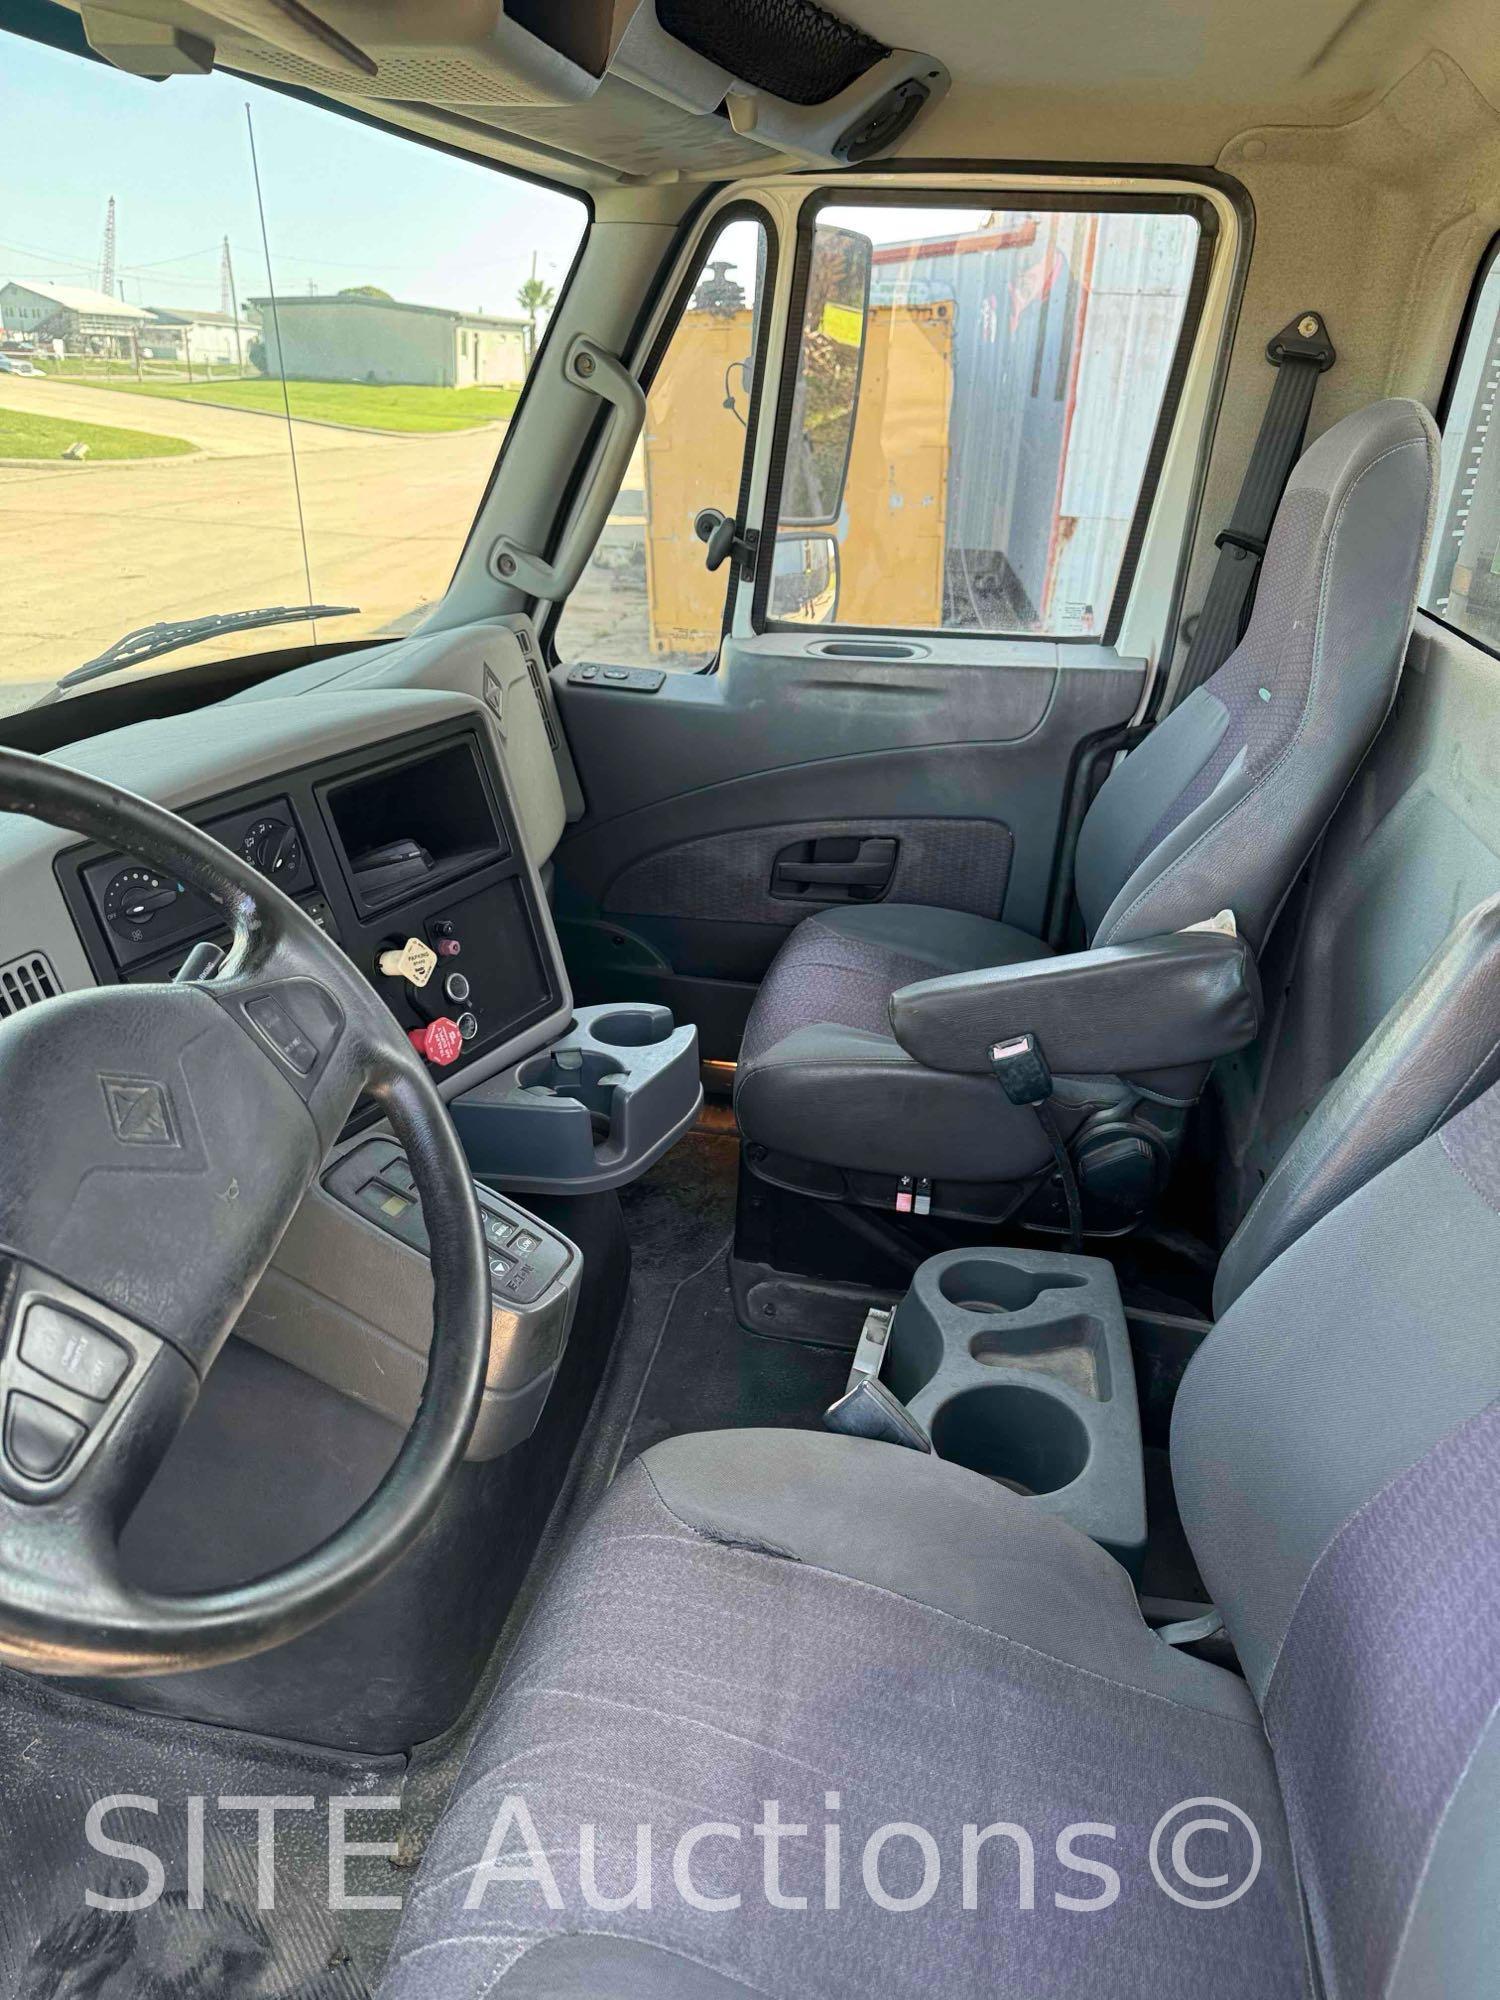 2013 International 8600 S/A Daycab Truck Tractor